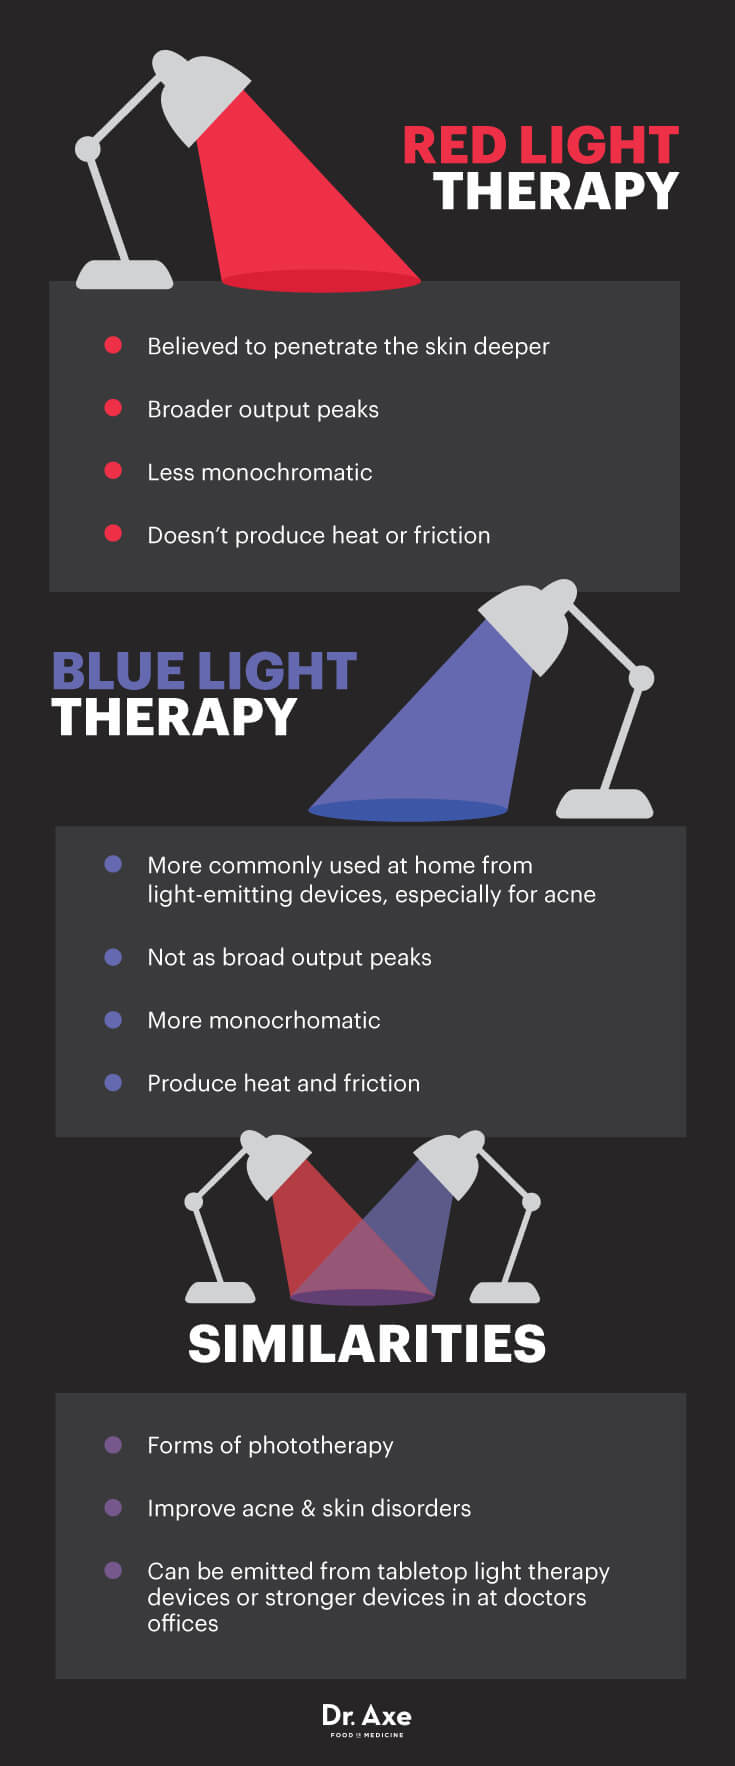 Red light therapy vs. blue light therapy - Dr. Axe